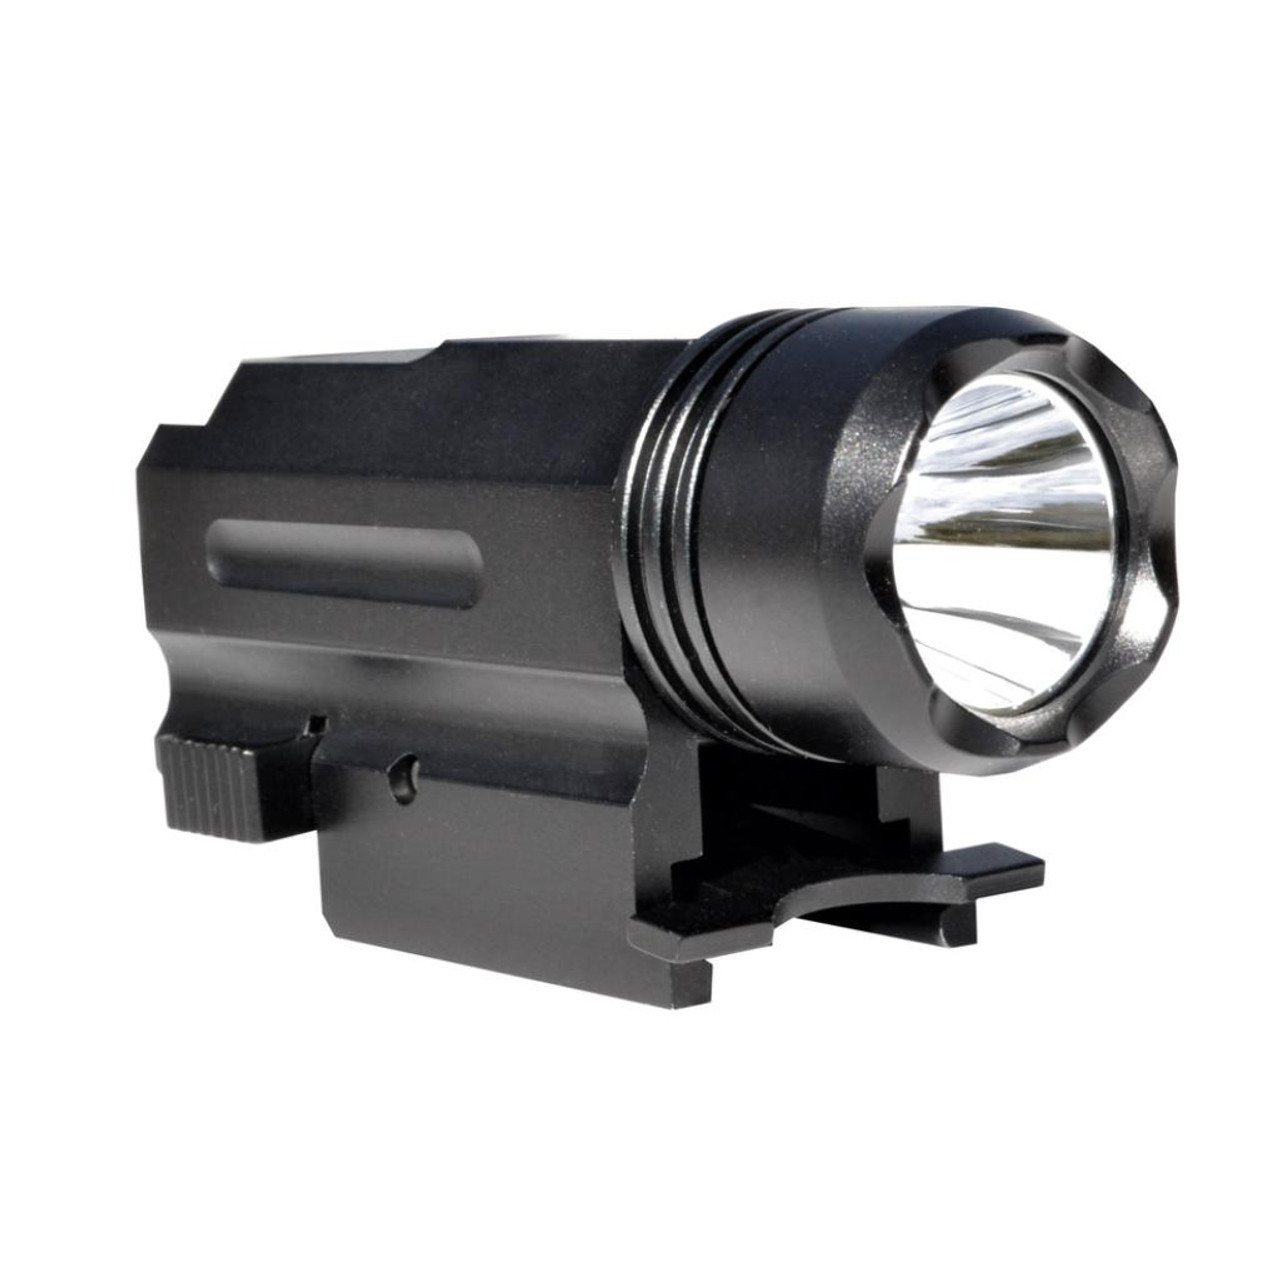 MCS LED Tactical Light 160 Lumens Rail-Mounted Battery included 5 modes 